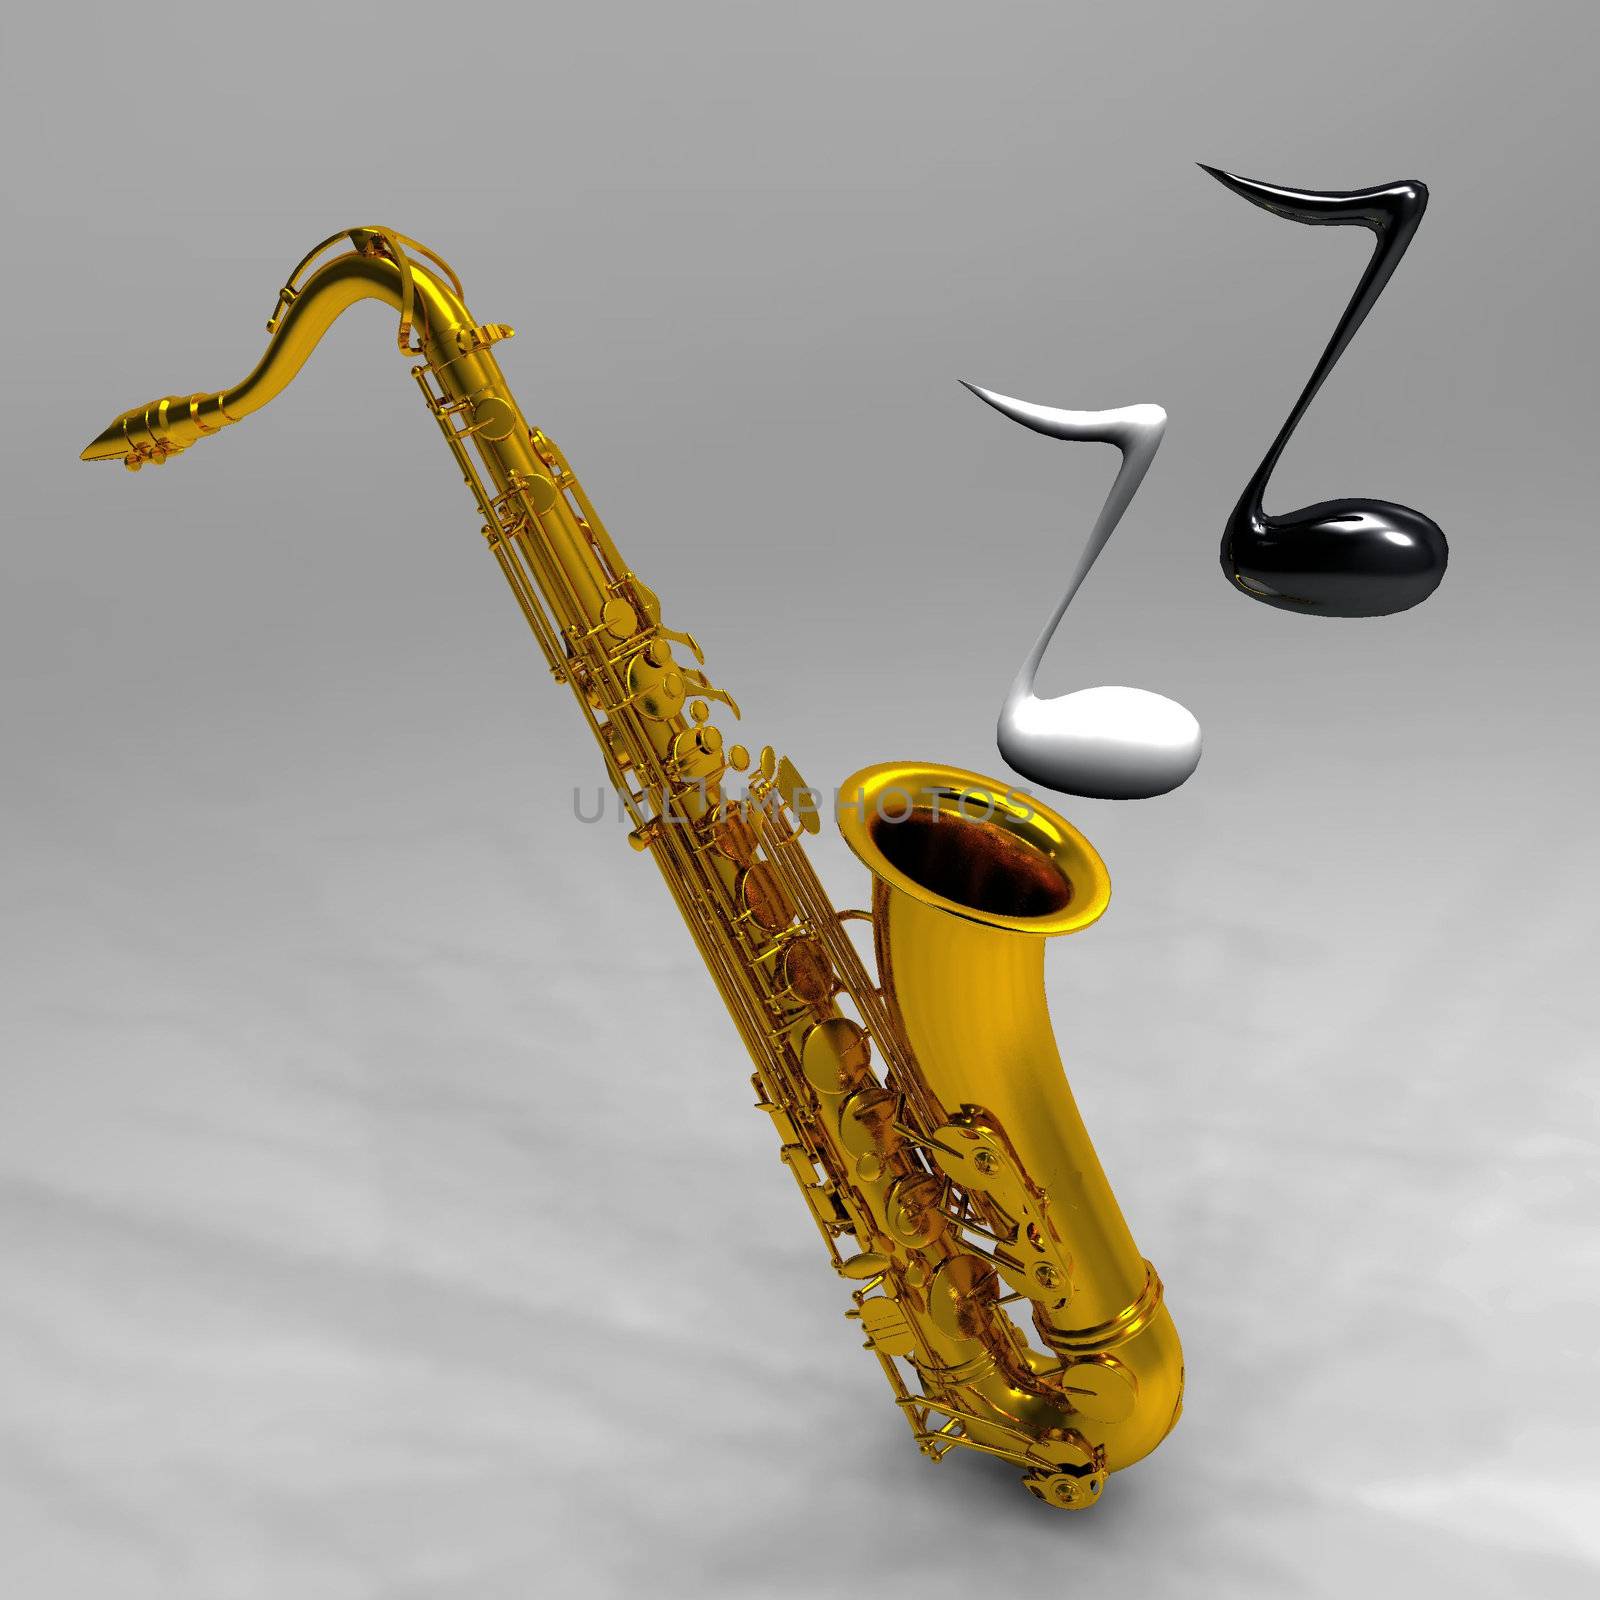 the saxophone and the notes